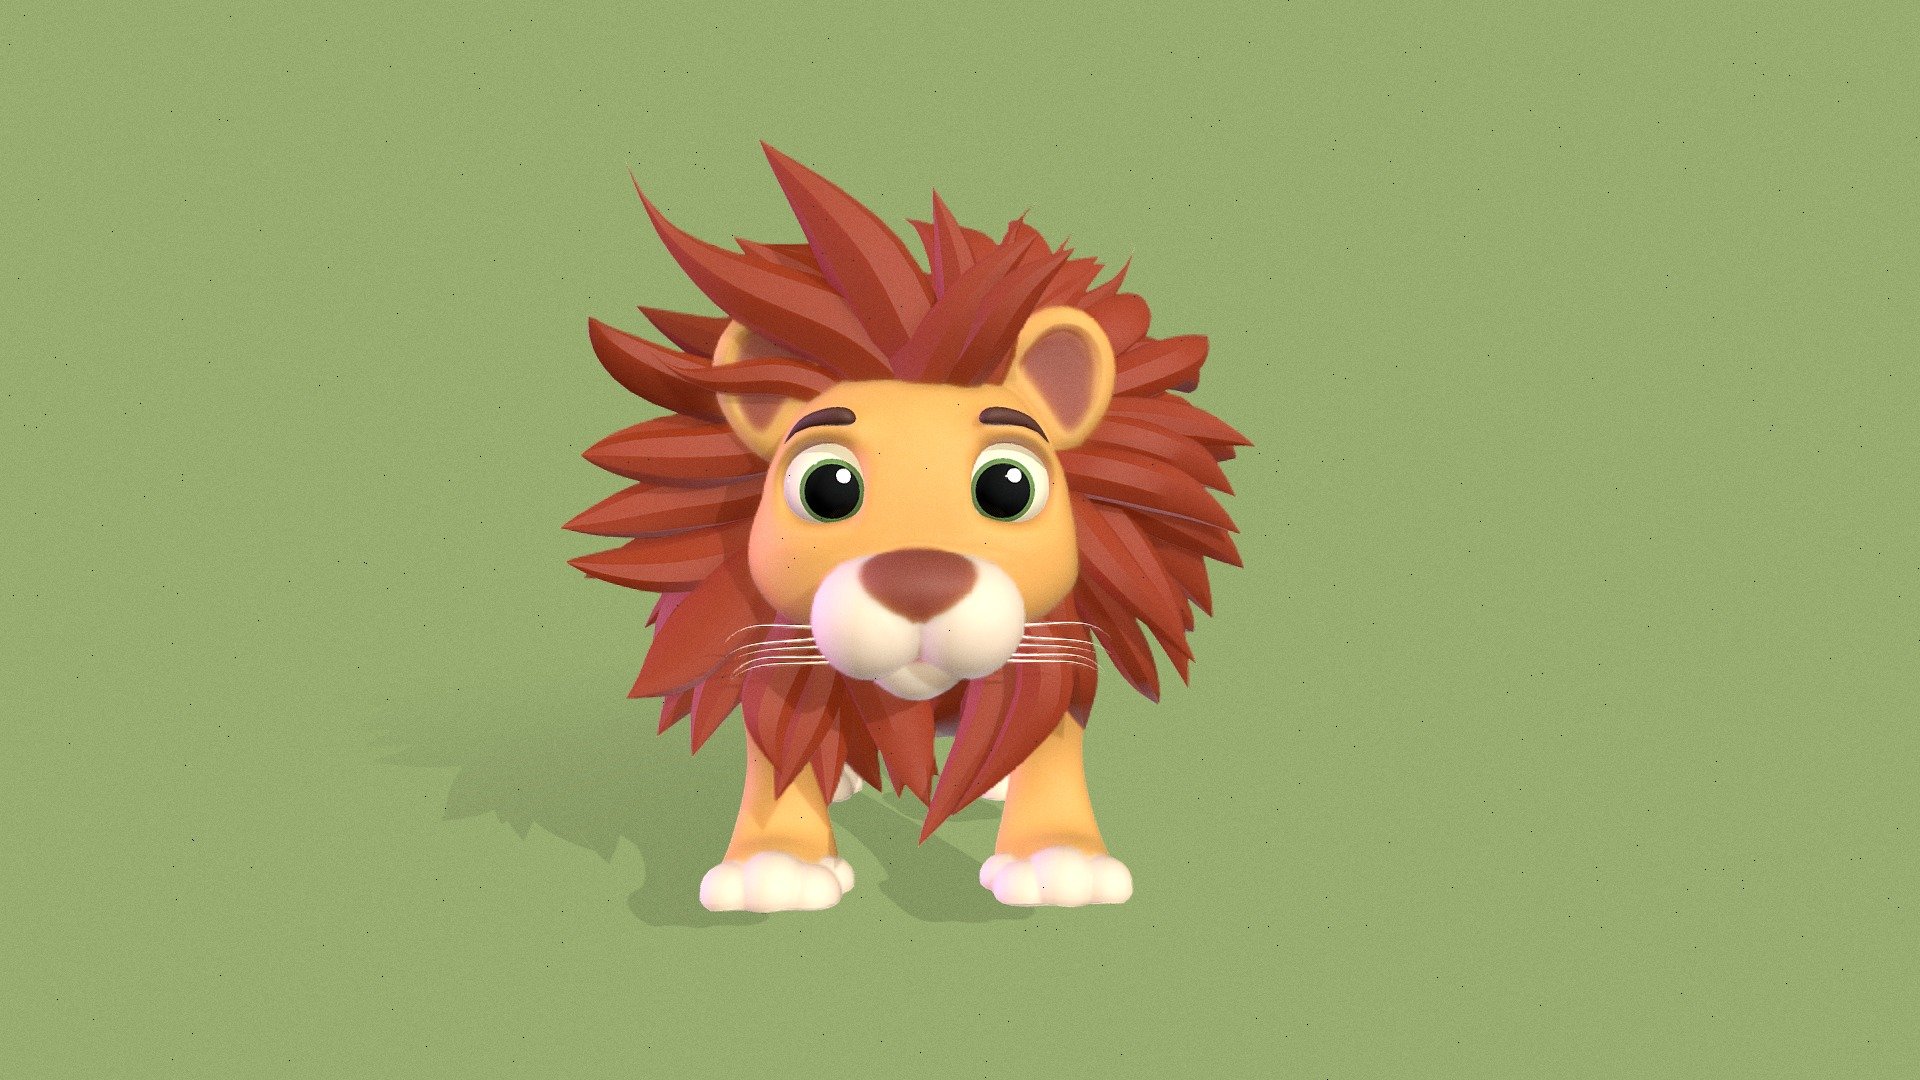 Roar with delight as you discover the cutest 3D Stylized Cute Toon Lion model online! Crafted with meticulous care and all quad topology, this endearing lion is subdivision ready, ensuring stunning detail in your projects. Fully rigged and ready for animation, this adorable lion will bring charisma and charm to any scene. Whether for games, animations, or art, this lovable character will captivate hearts and spark joy. Don't miss the chance to add a dash of whimsy to your creations - adopt the most charming 3D lion model today! - Stylized Toon Lion (rigged) - Buy Royalty Free 3D model by ahingel 3d model